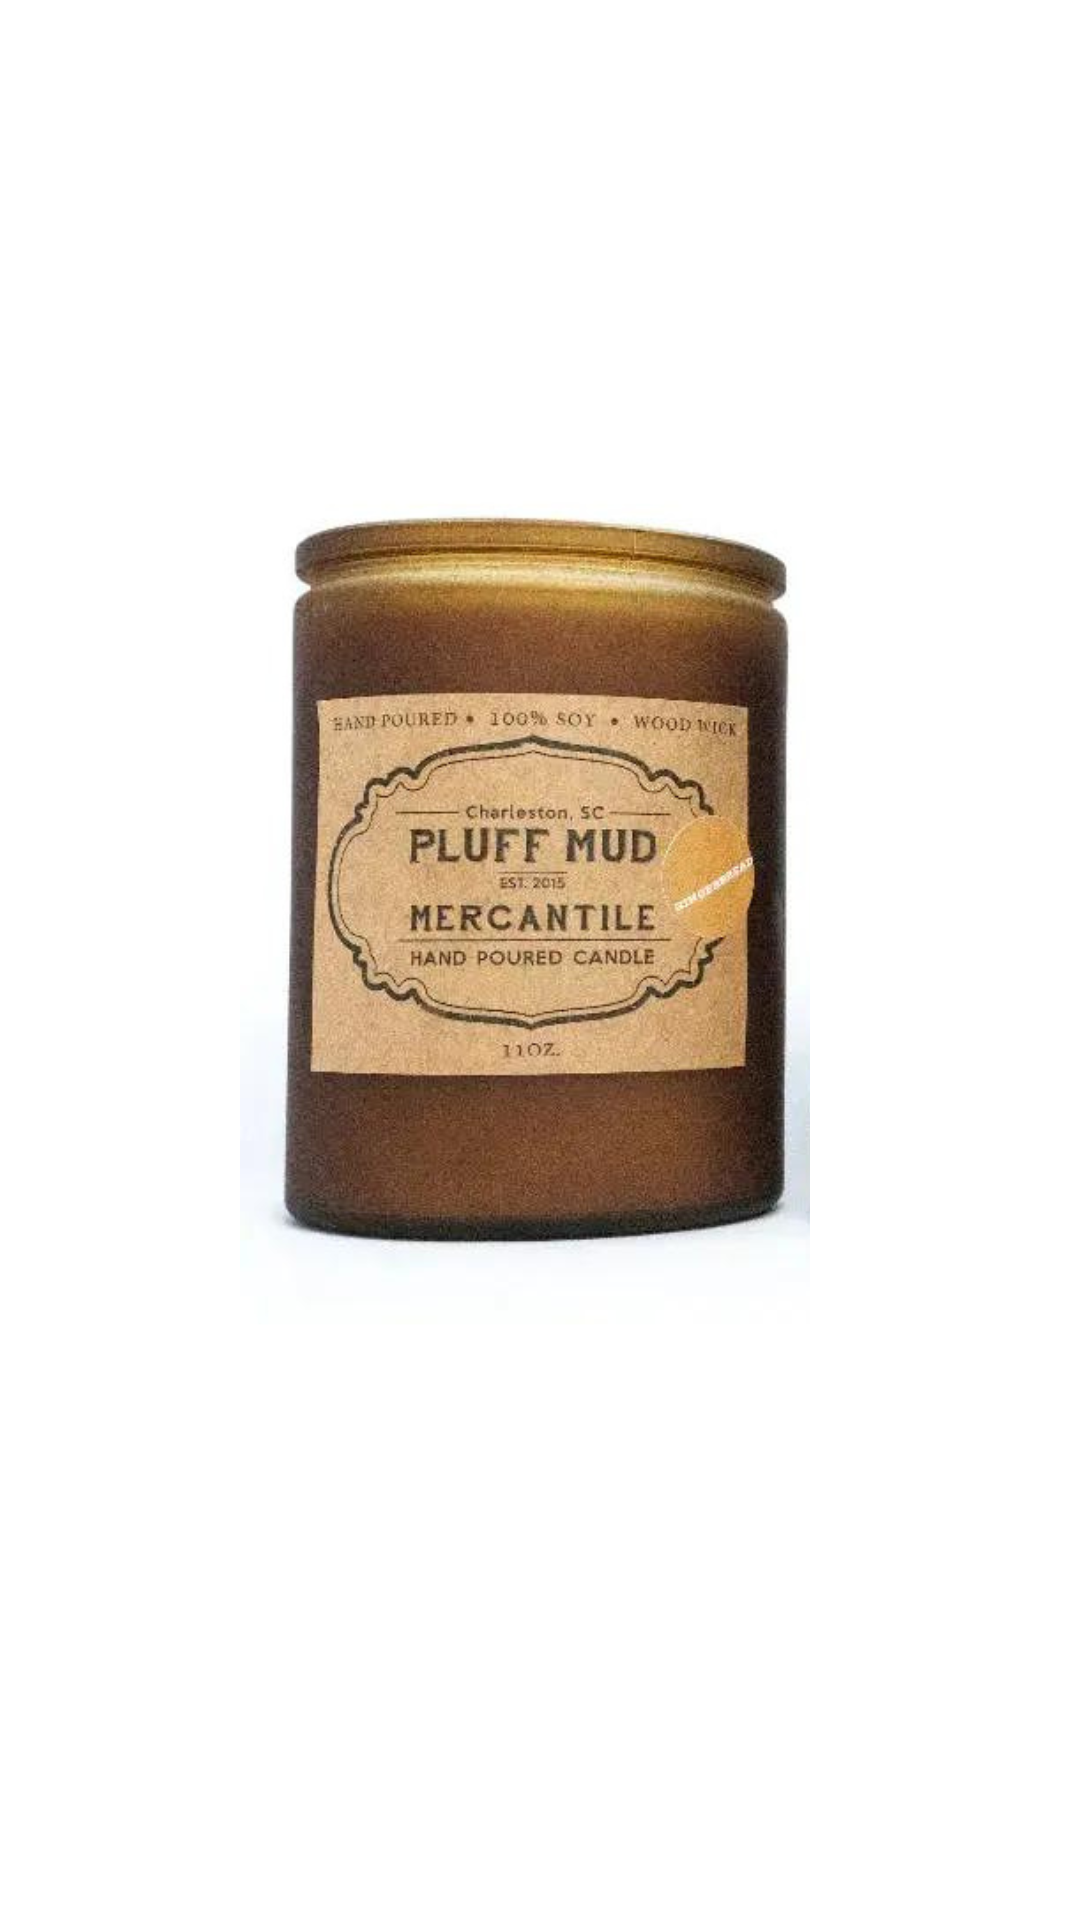 Bourbon Maple Apple Hand Poured Soy Candle - Pluff Mud Mercantile